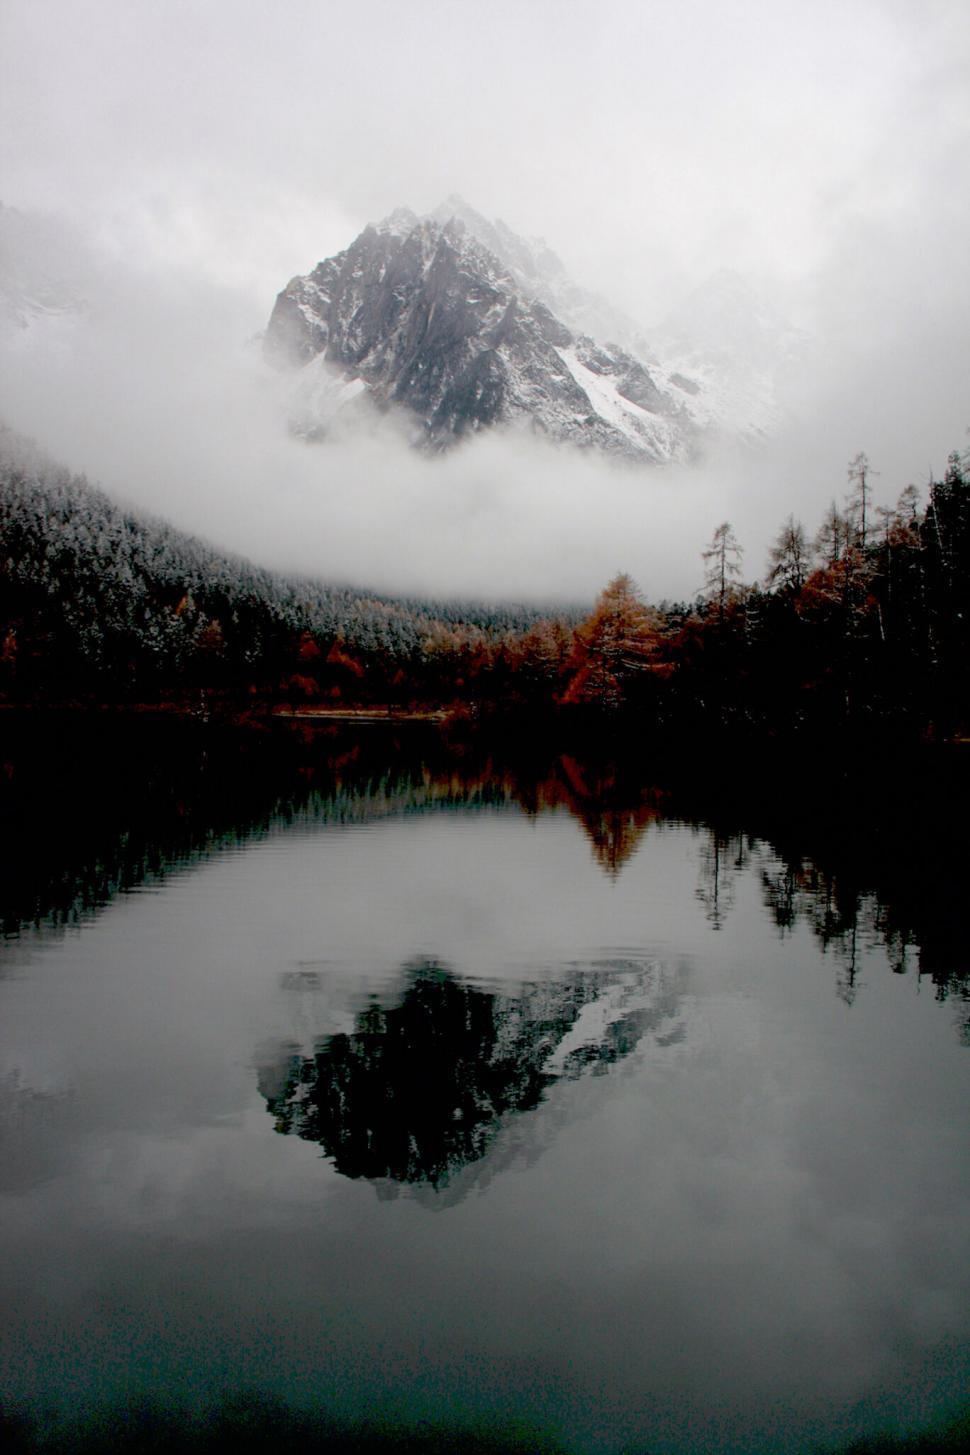 Free Image of A lake with a mountain in the background 